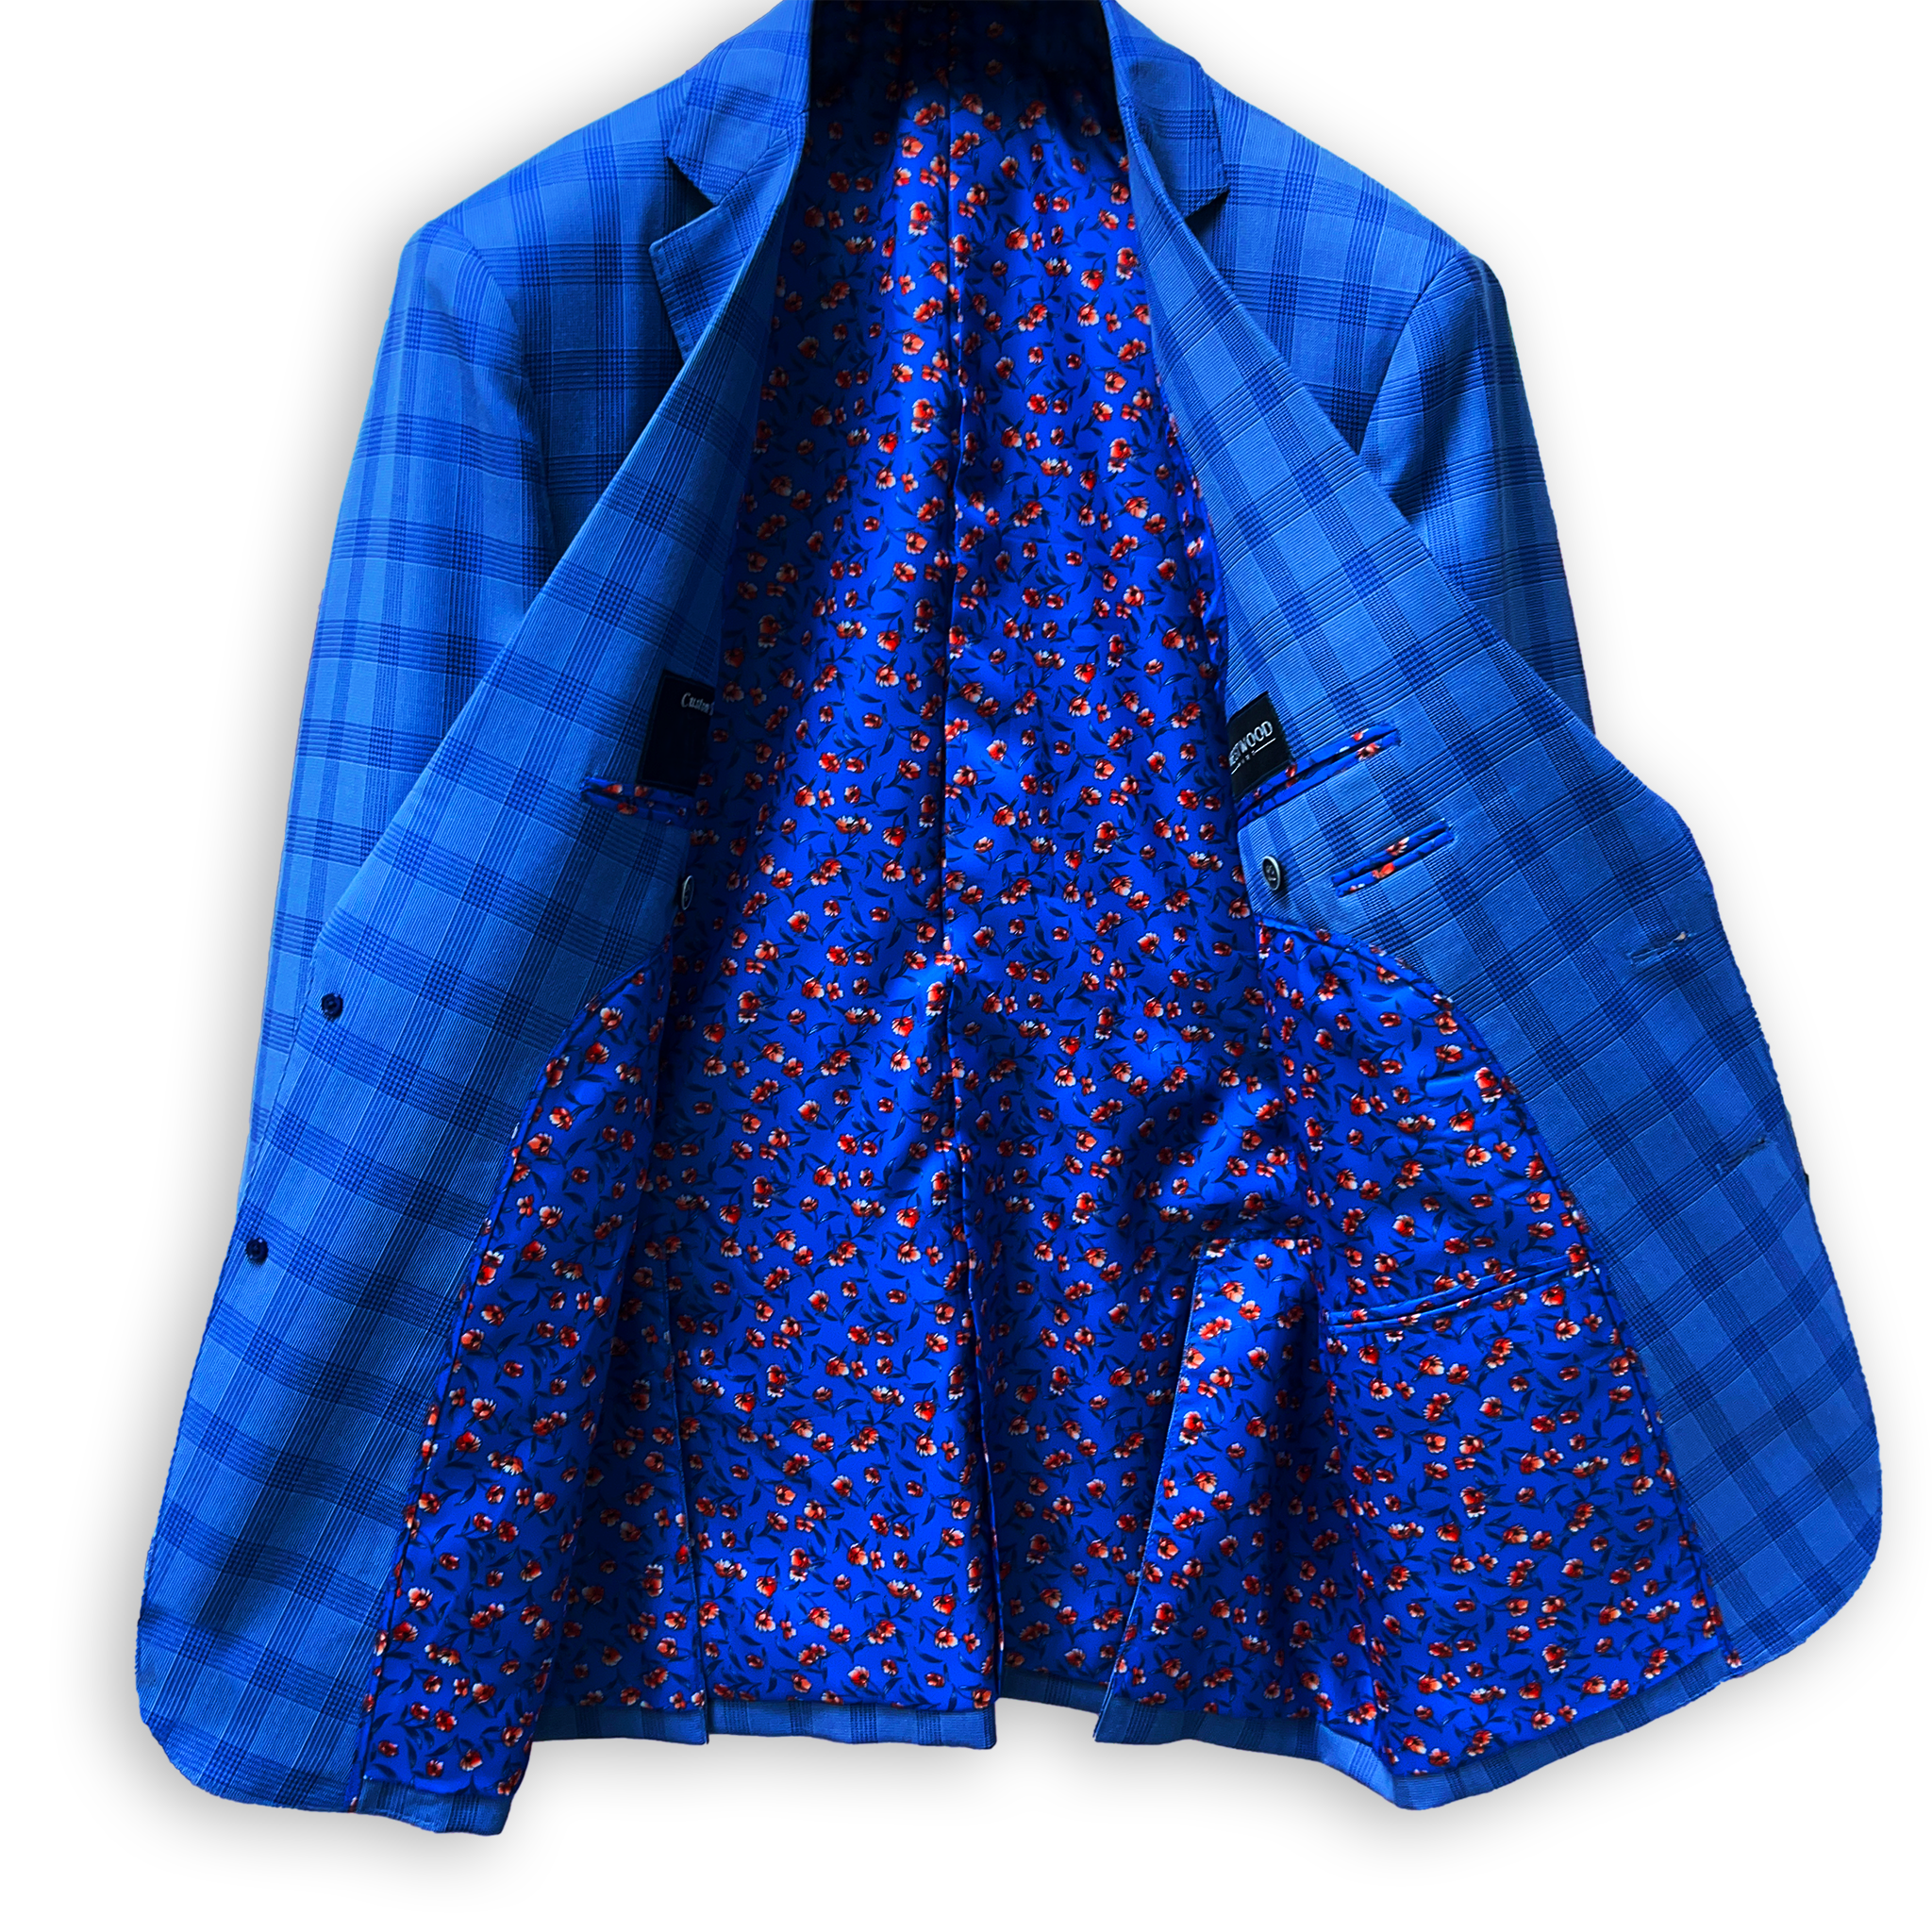 Westwood Hart Online Custom Hand Tailor Suits Sportcoats Trousers Waistcoats Overcoats Electric Blue Self Plaid Design